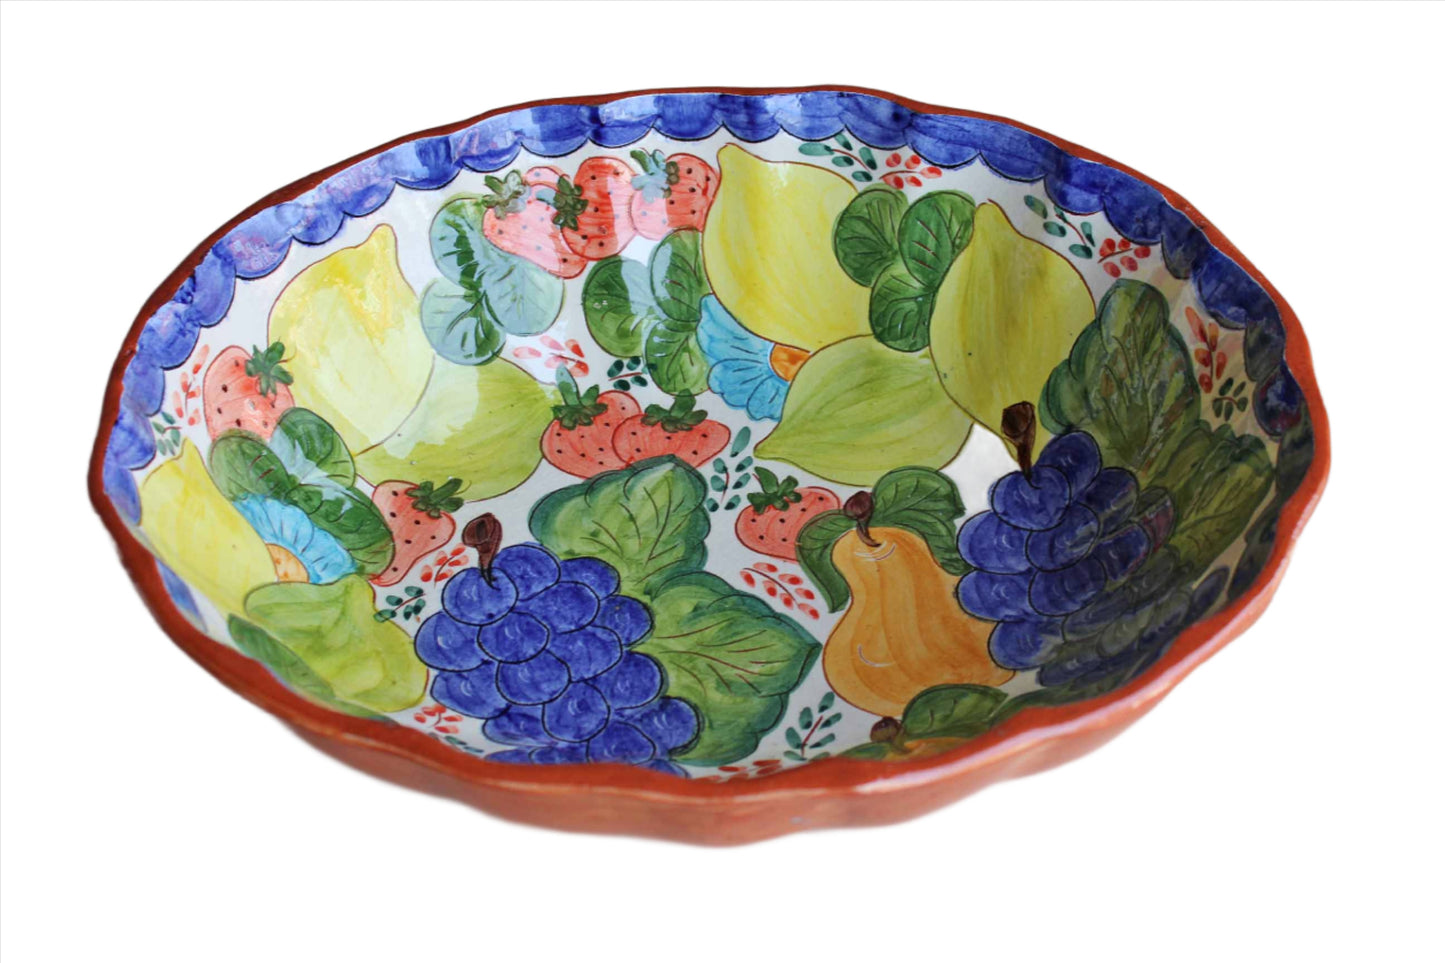 Pottery José Cartaxo (Portugal) Large Bowl with Colorful Fruits and Flowers